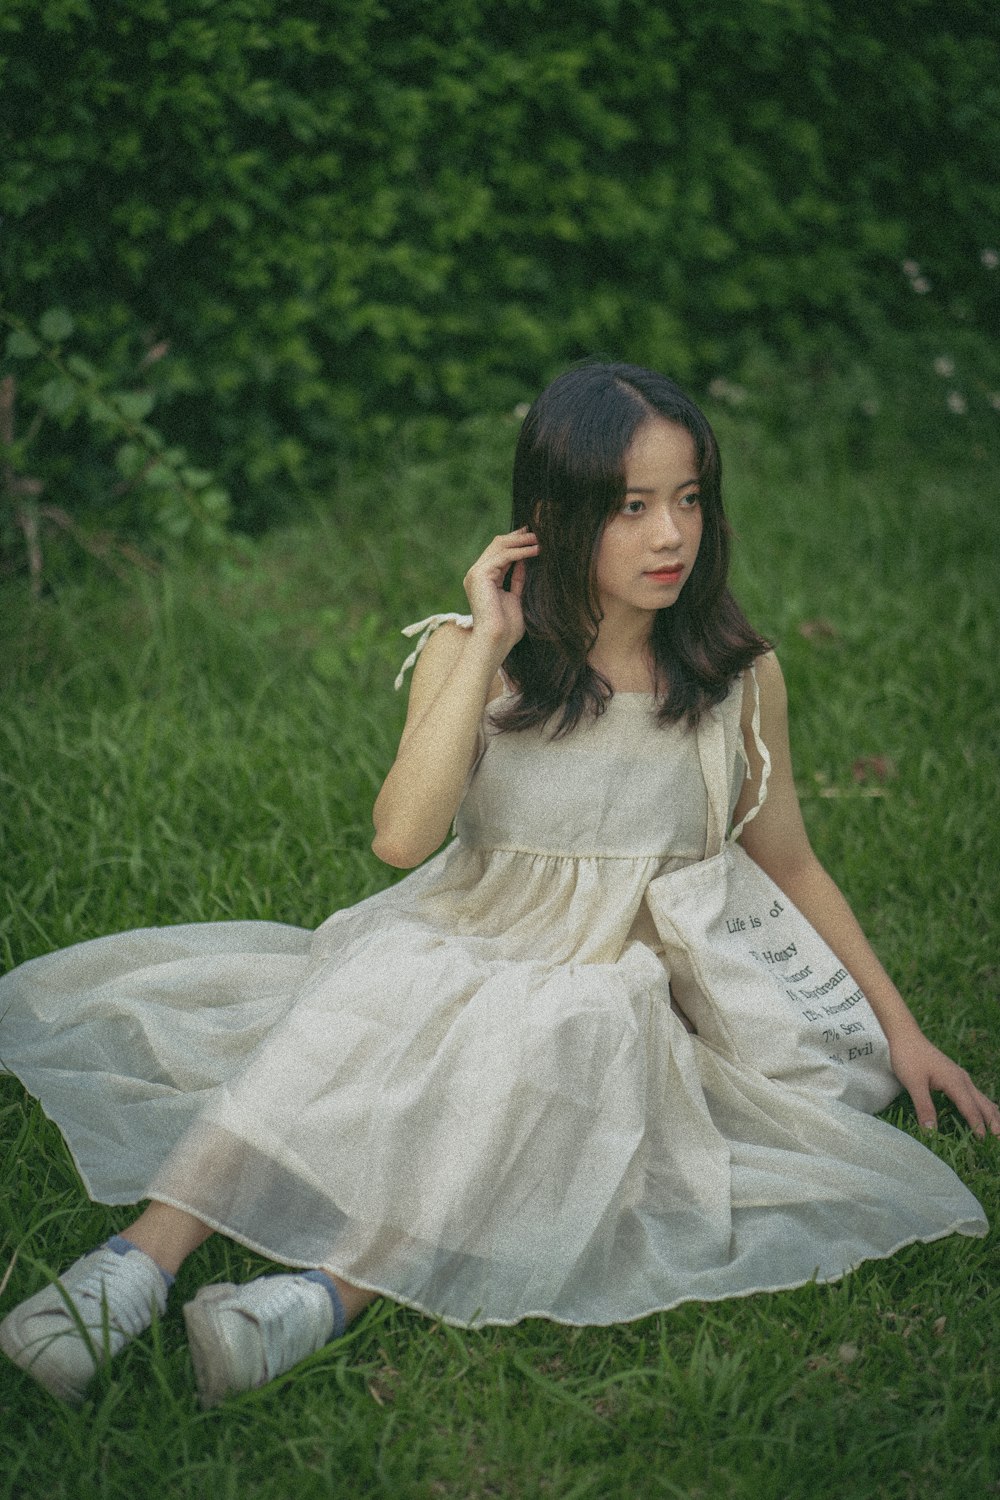 girl in white dress sitting on green grass field during daytime